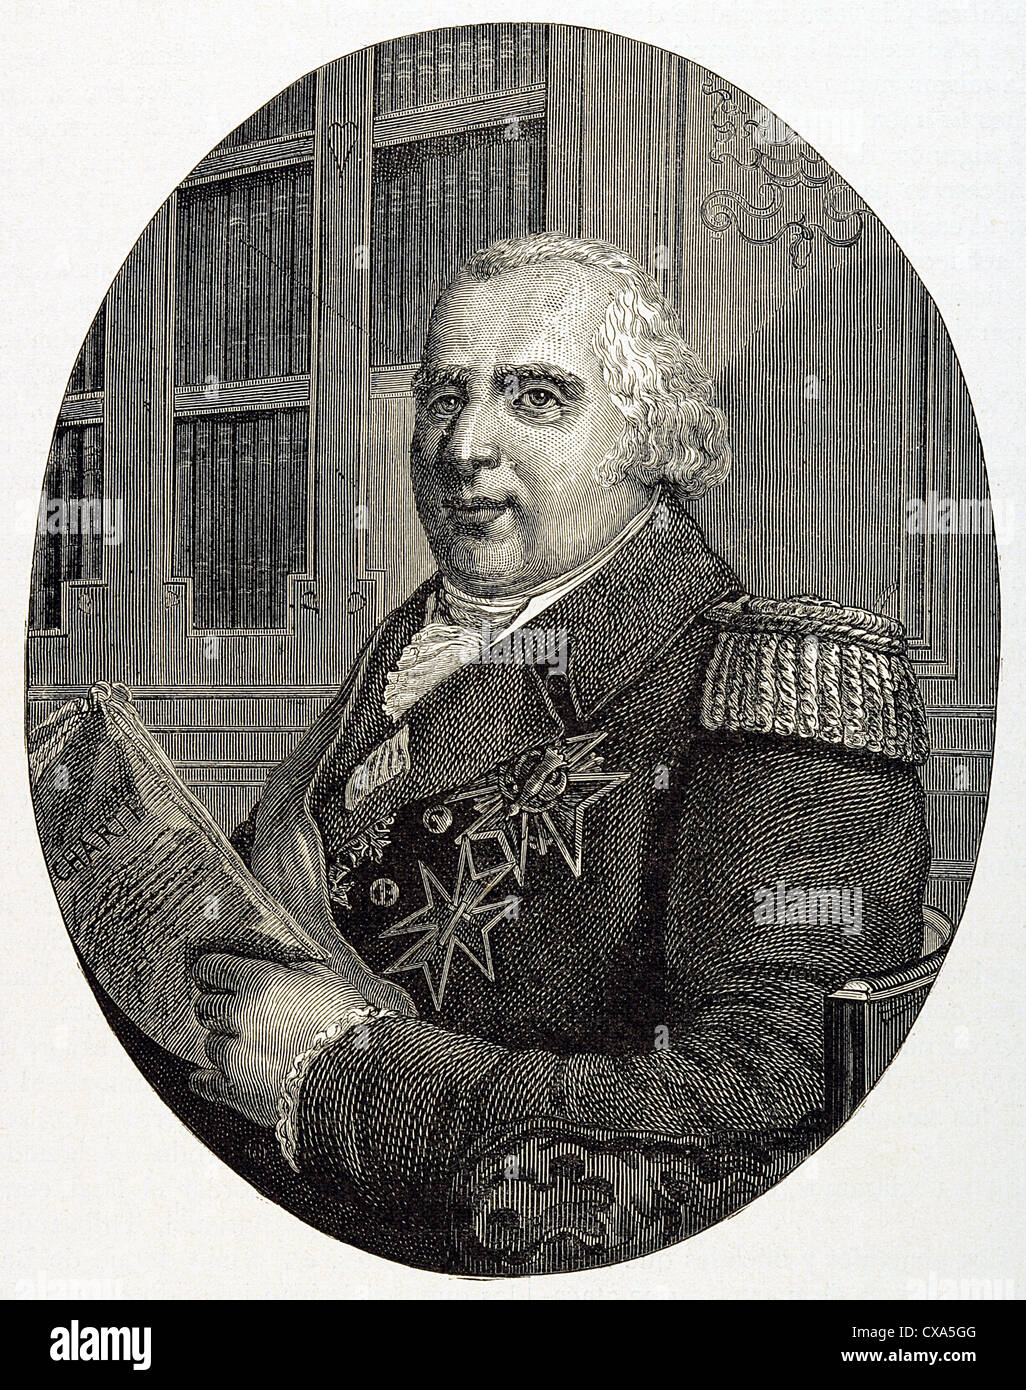 Louis XVIII (1755-1824). King of France from 1814-15 and 1815-24 Stock Photo, Royalty Free Image ...